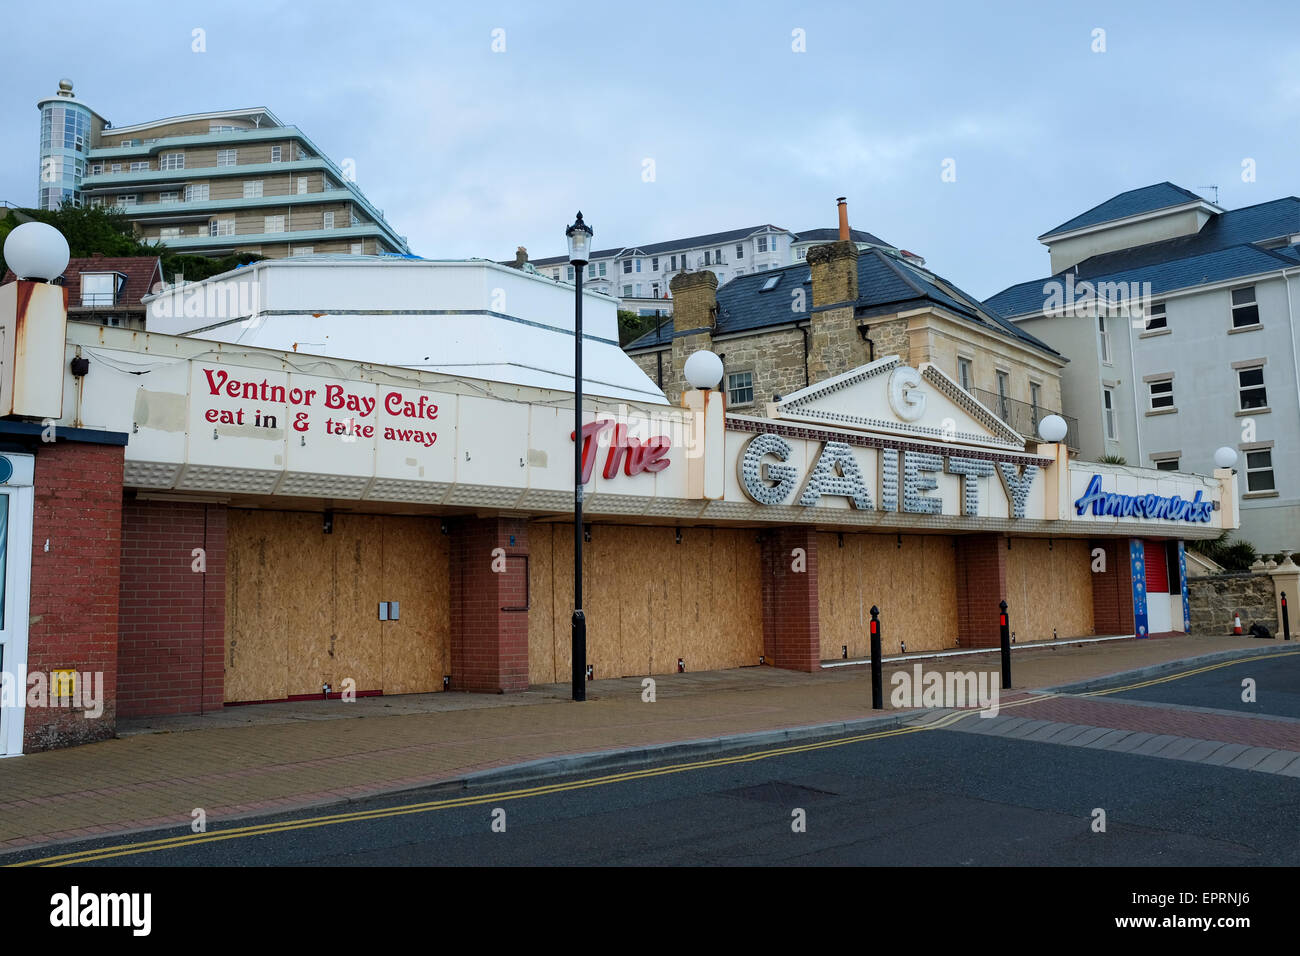 Derelict building on Ventnor seafront. Isle of Wight, England. Stock Photo